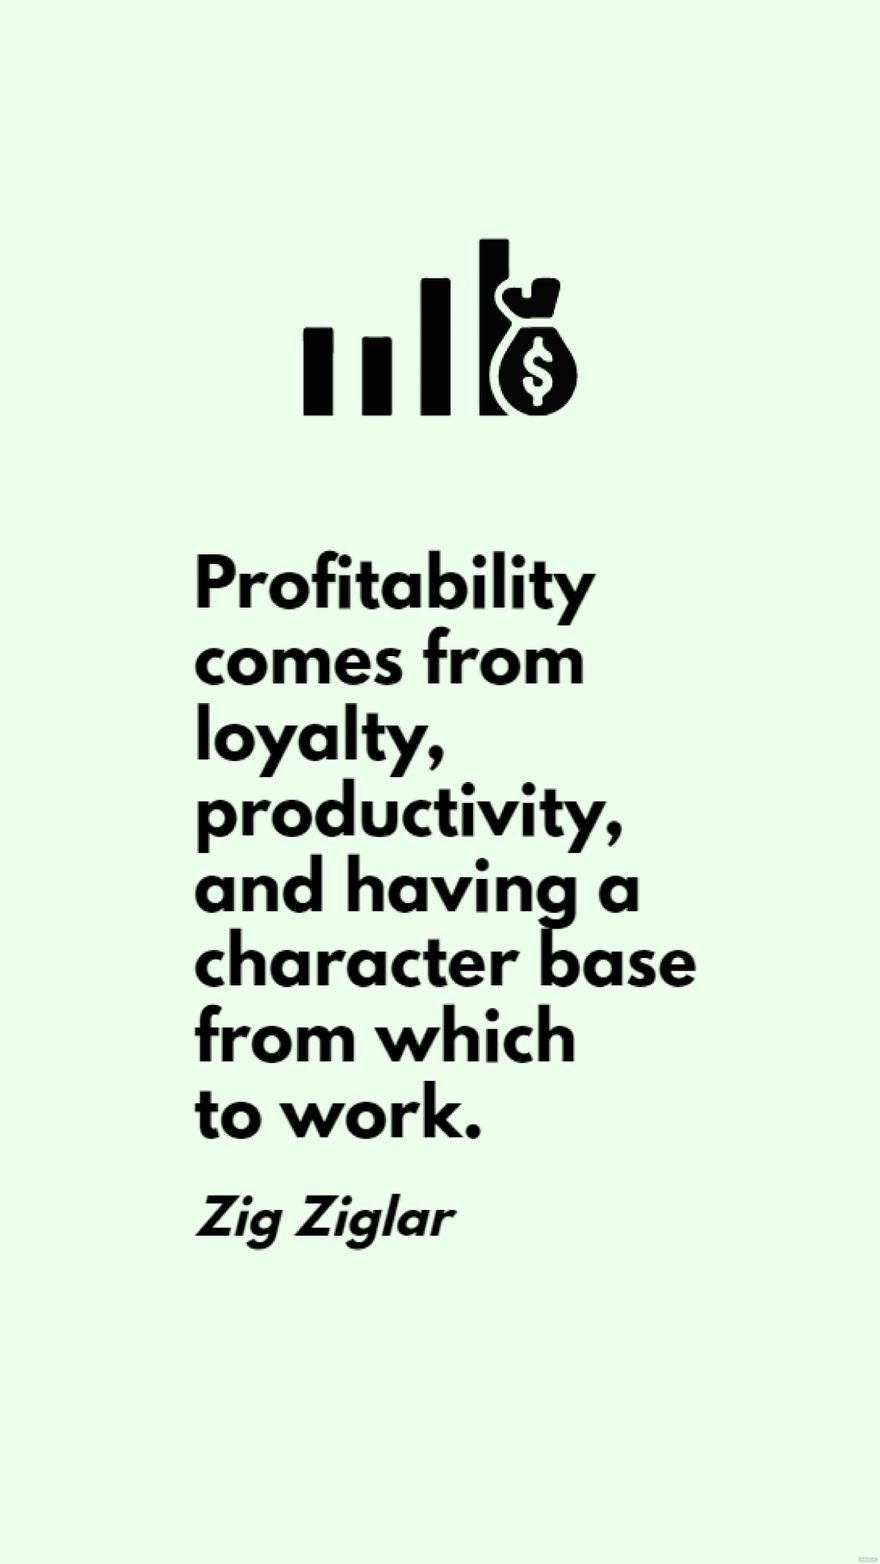 Free Zig Ziglar - Profitability comes from loyalty, productivity, and having a character base from which to work. in JPG